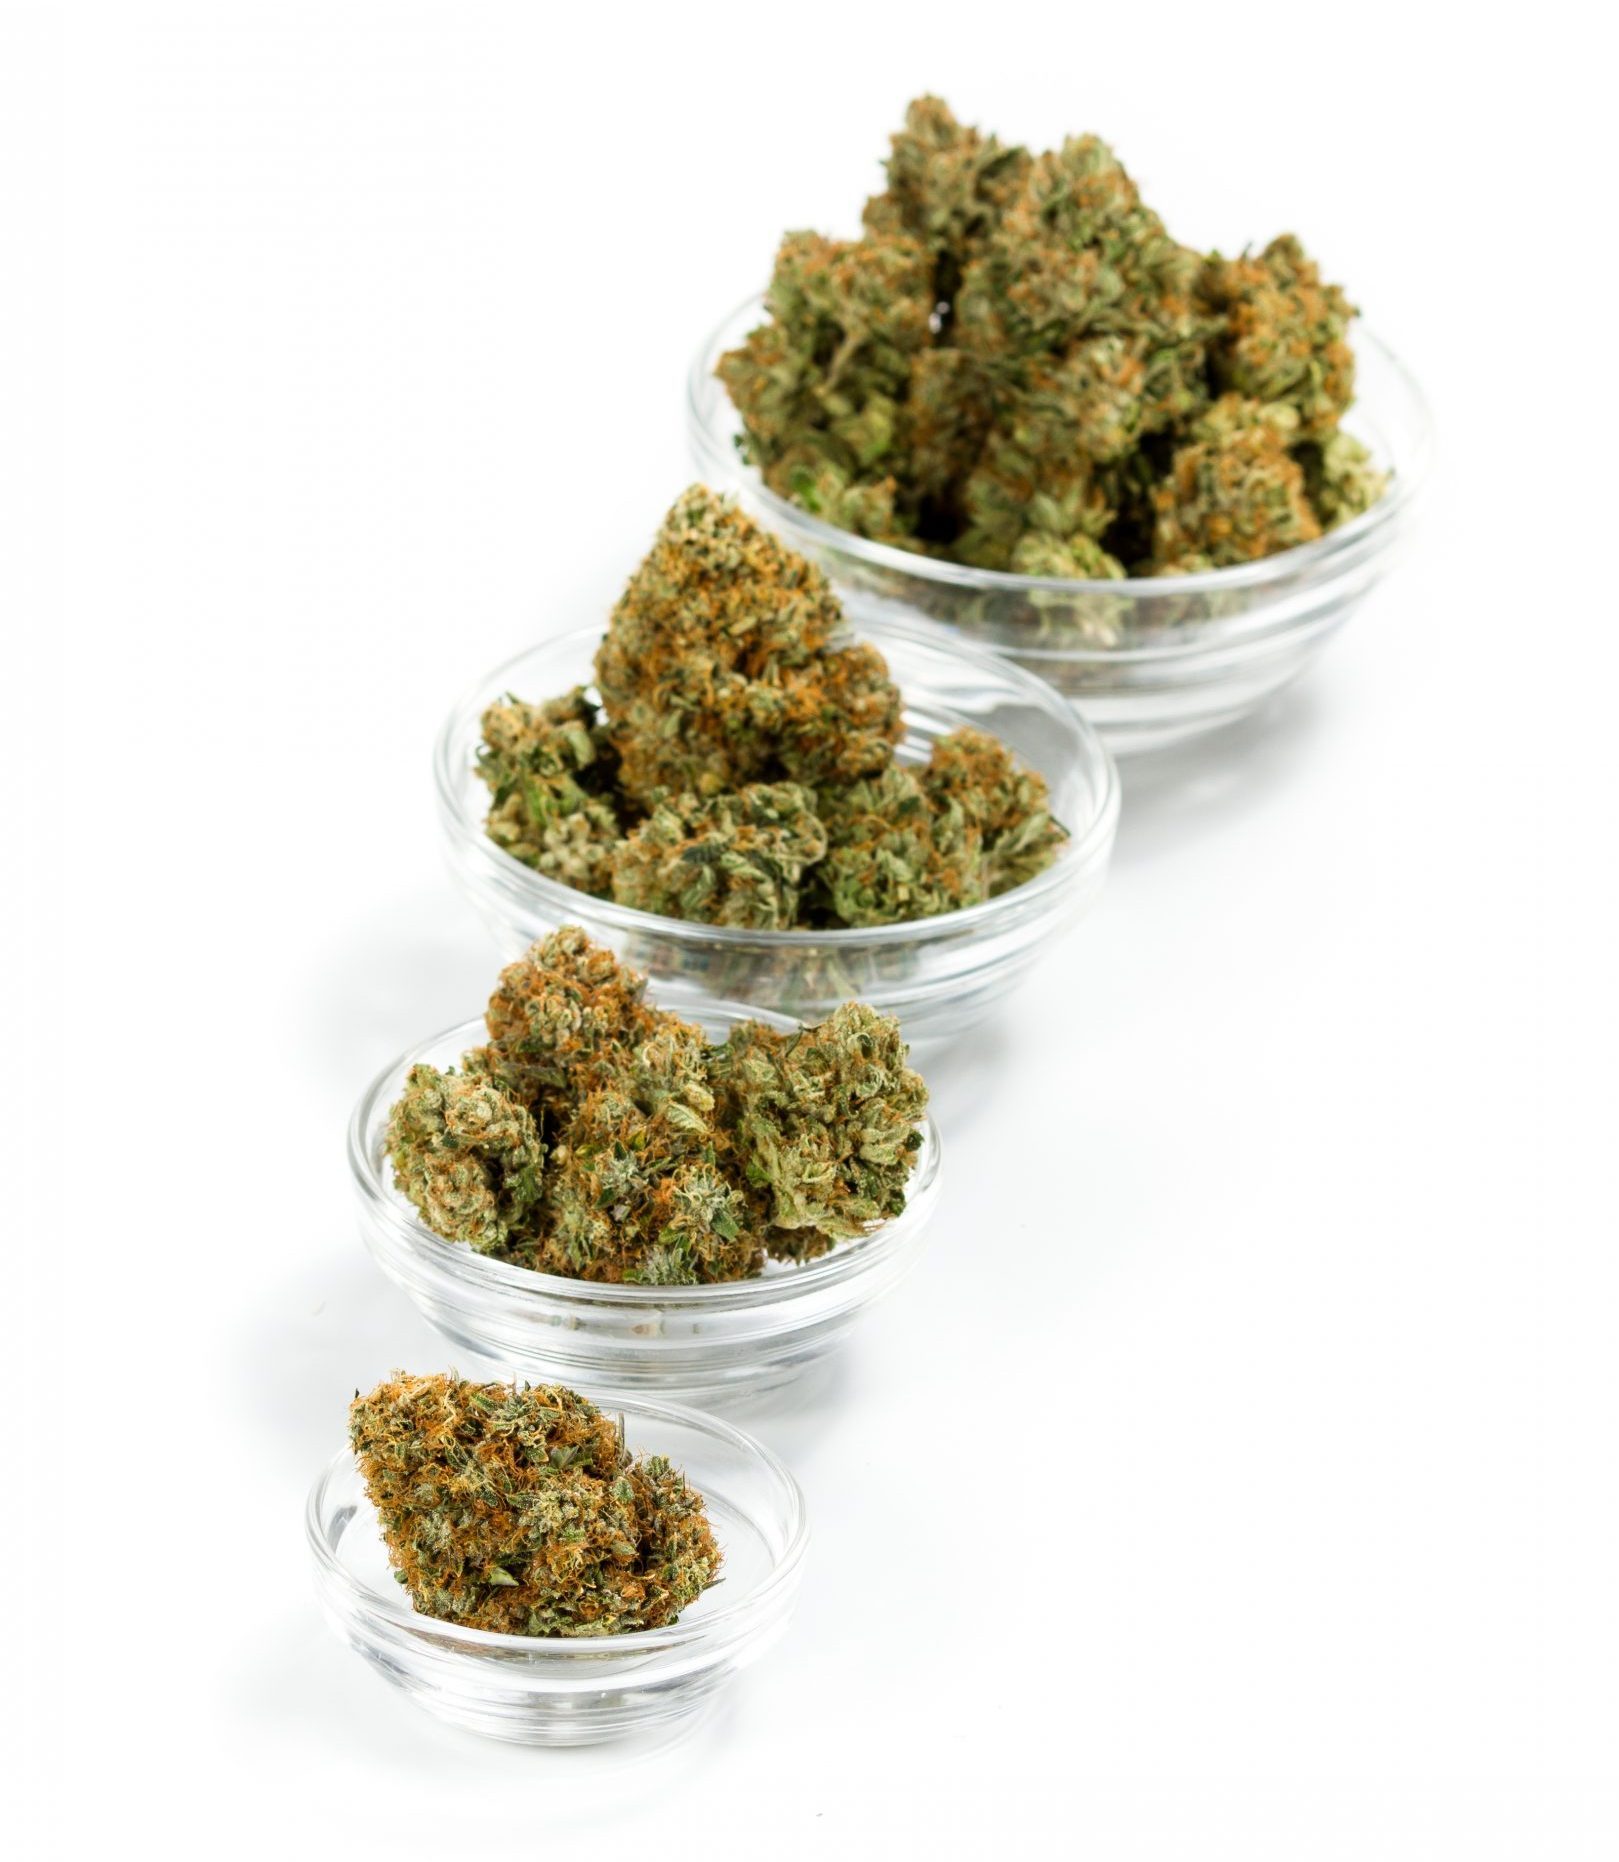 stackable glass containers filled with cannabis buds isolated on a white background